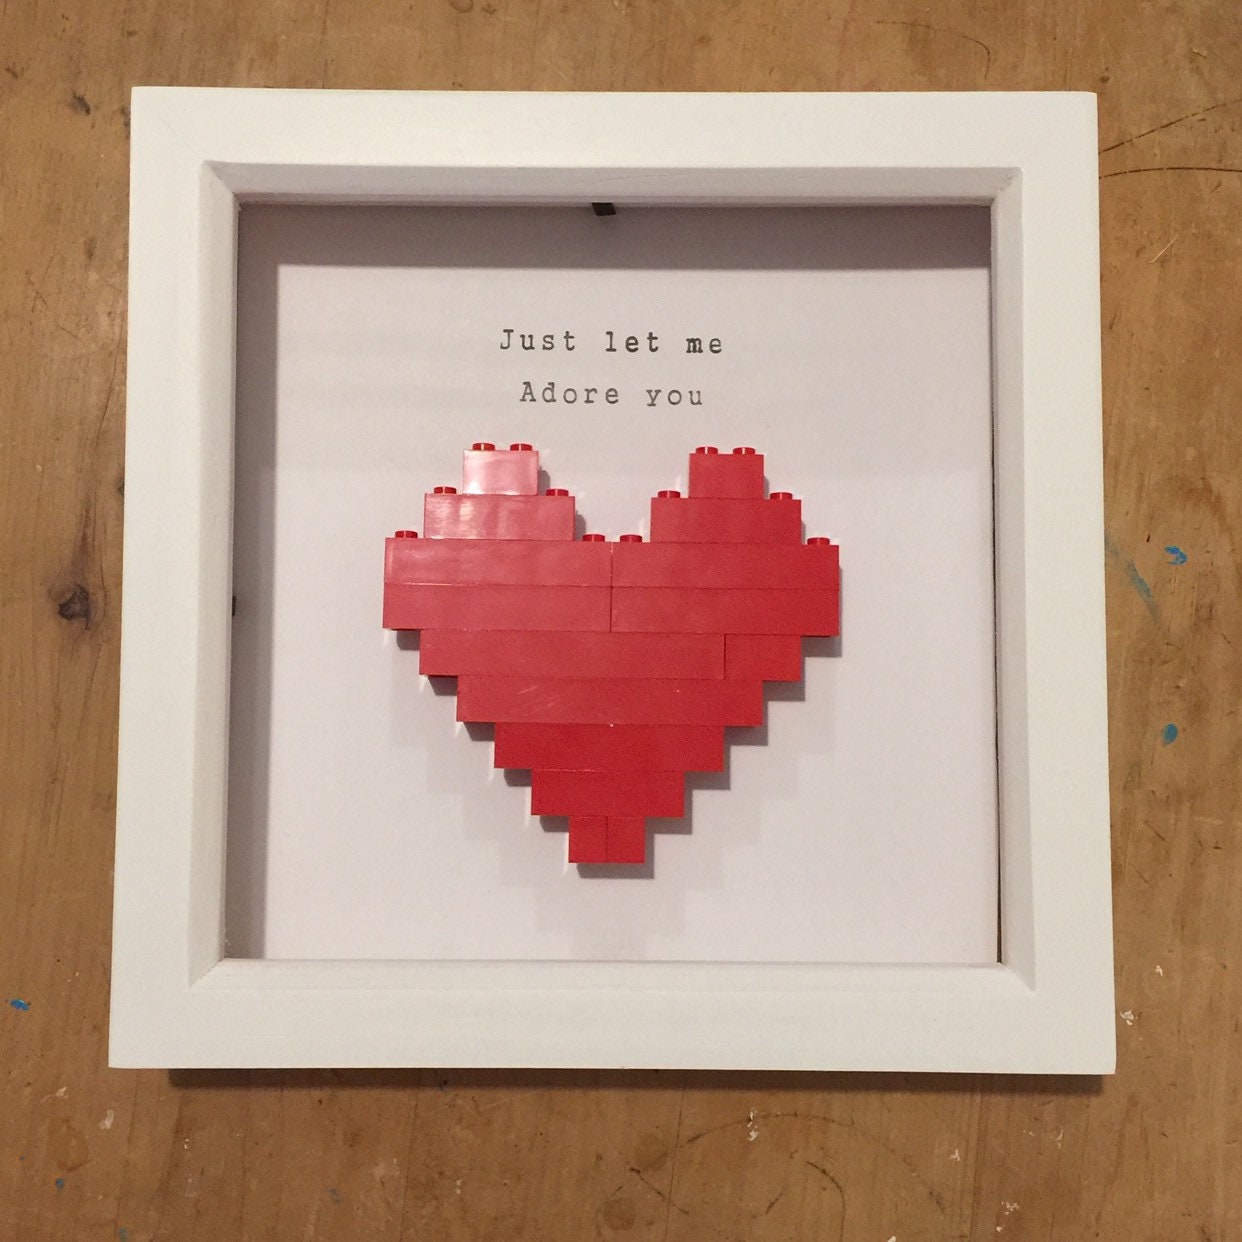 Lego Heart in wooden frame with hand printed quote ‘Just let me adore you’